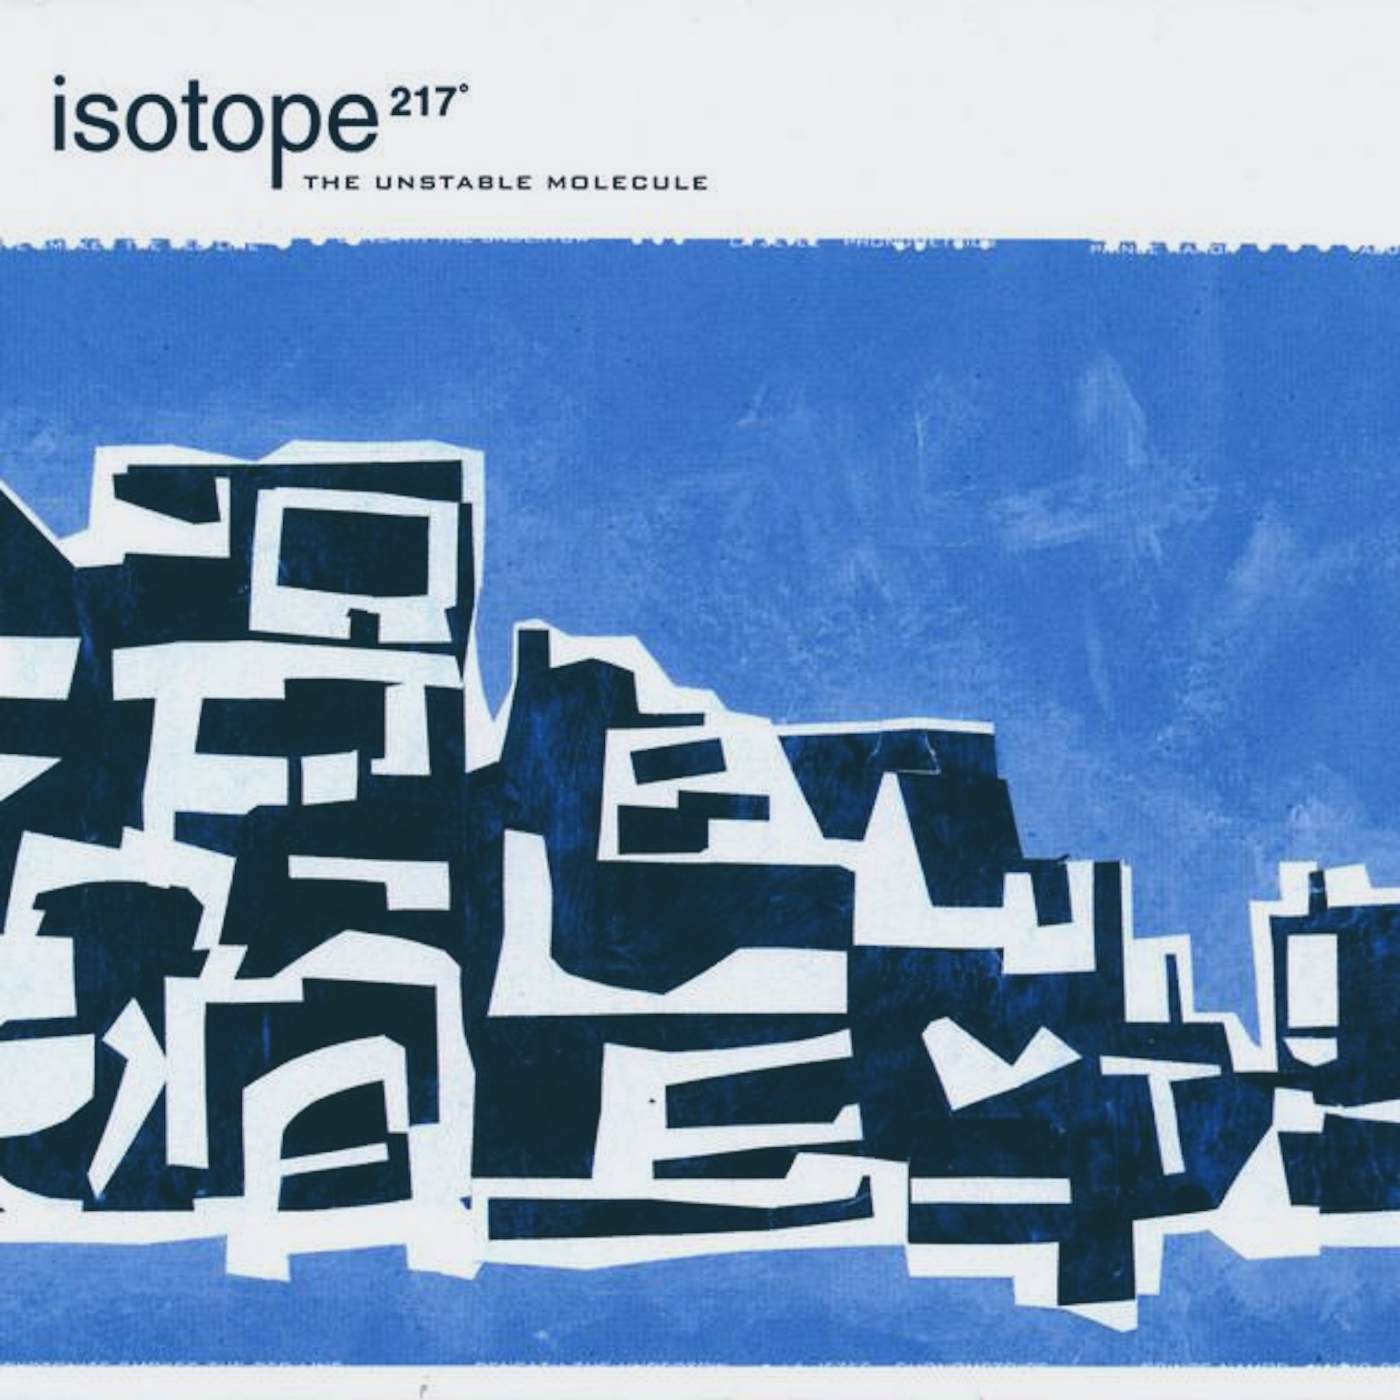 Isotope 217